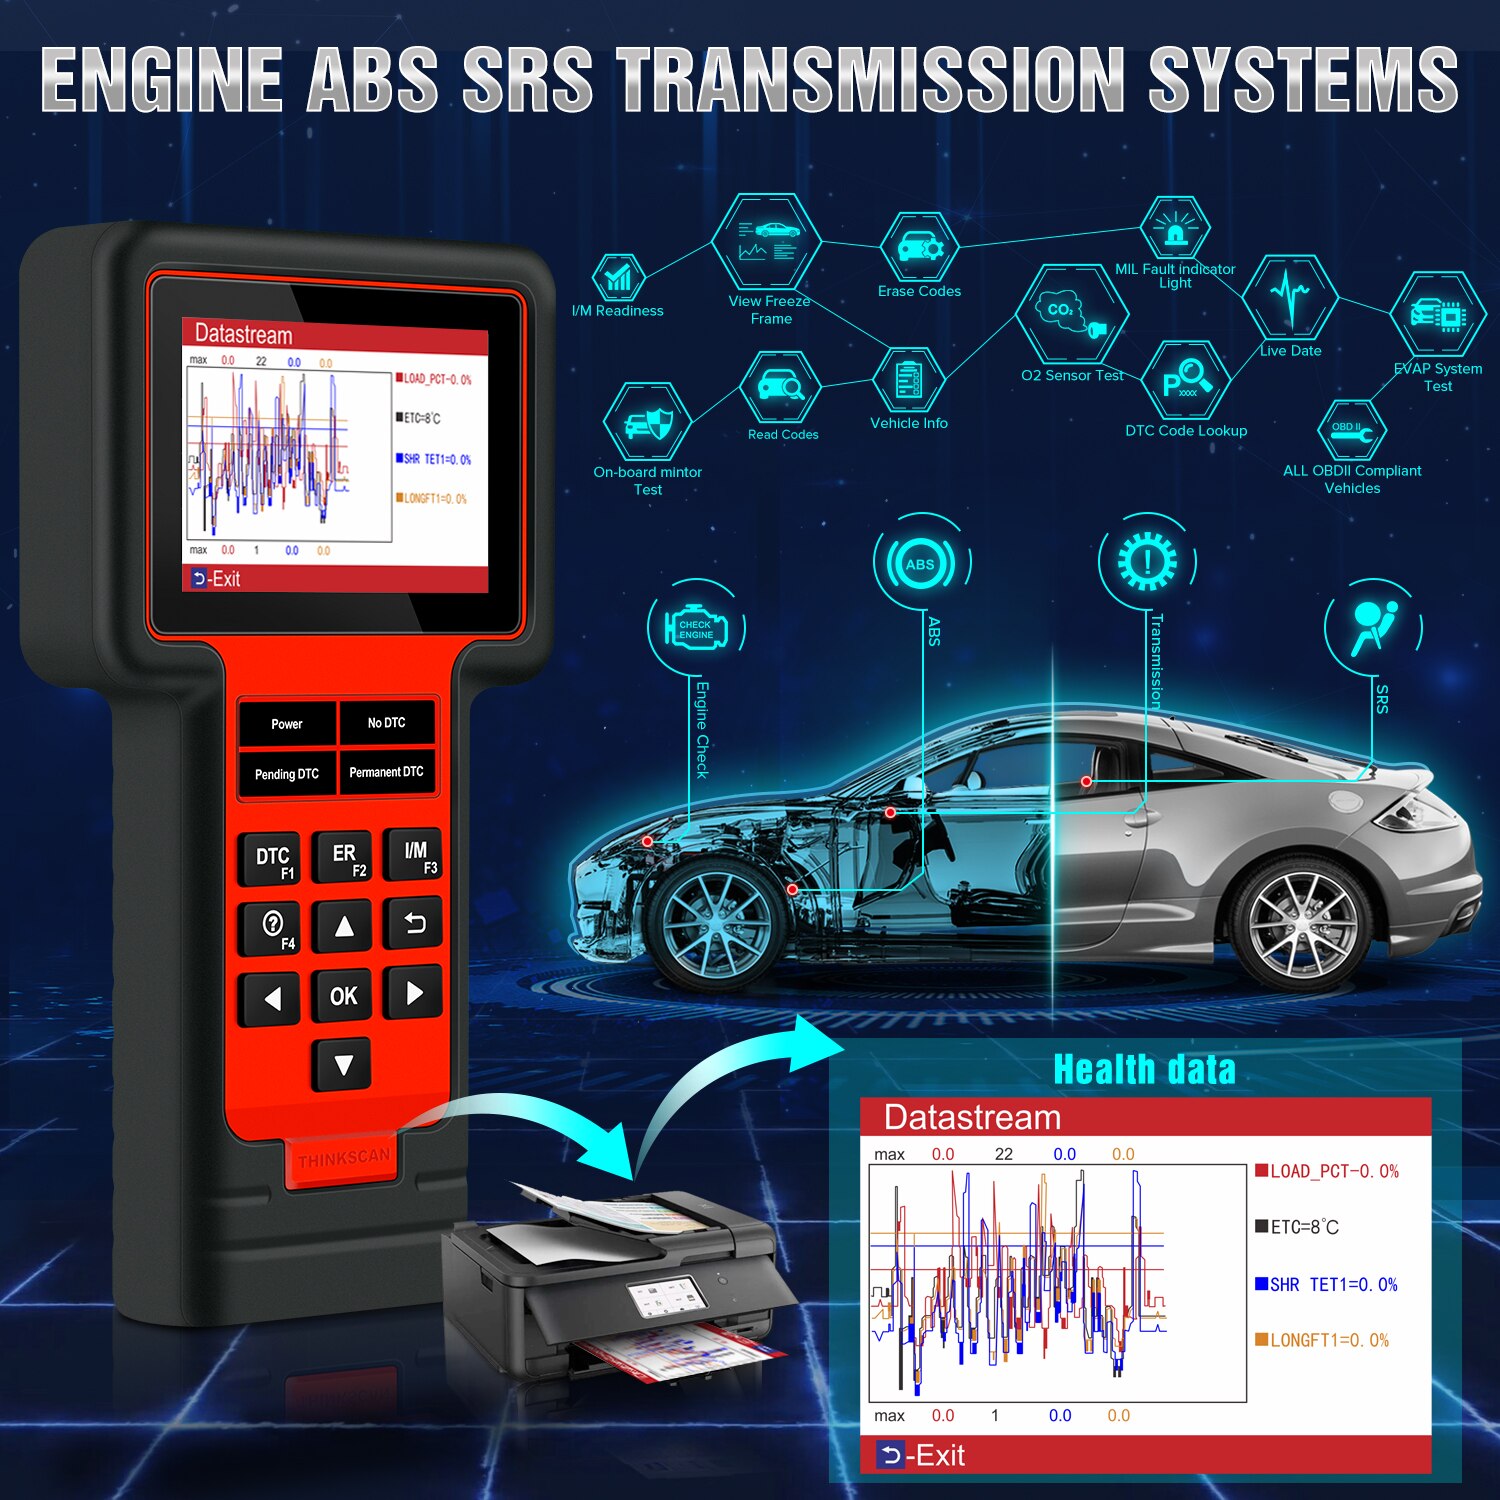 Thinkcar-TS609-OBD2-Scanner-ECM-TCM-ABS-SRS-System-Diagnostic-tool-with-Oil-Brake-TPMS-SAS-ETS-Injec-BMS-DPF-Reset-free-update-1005001767650504